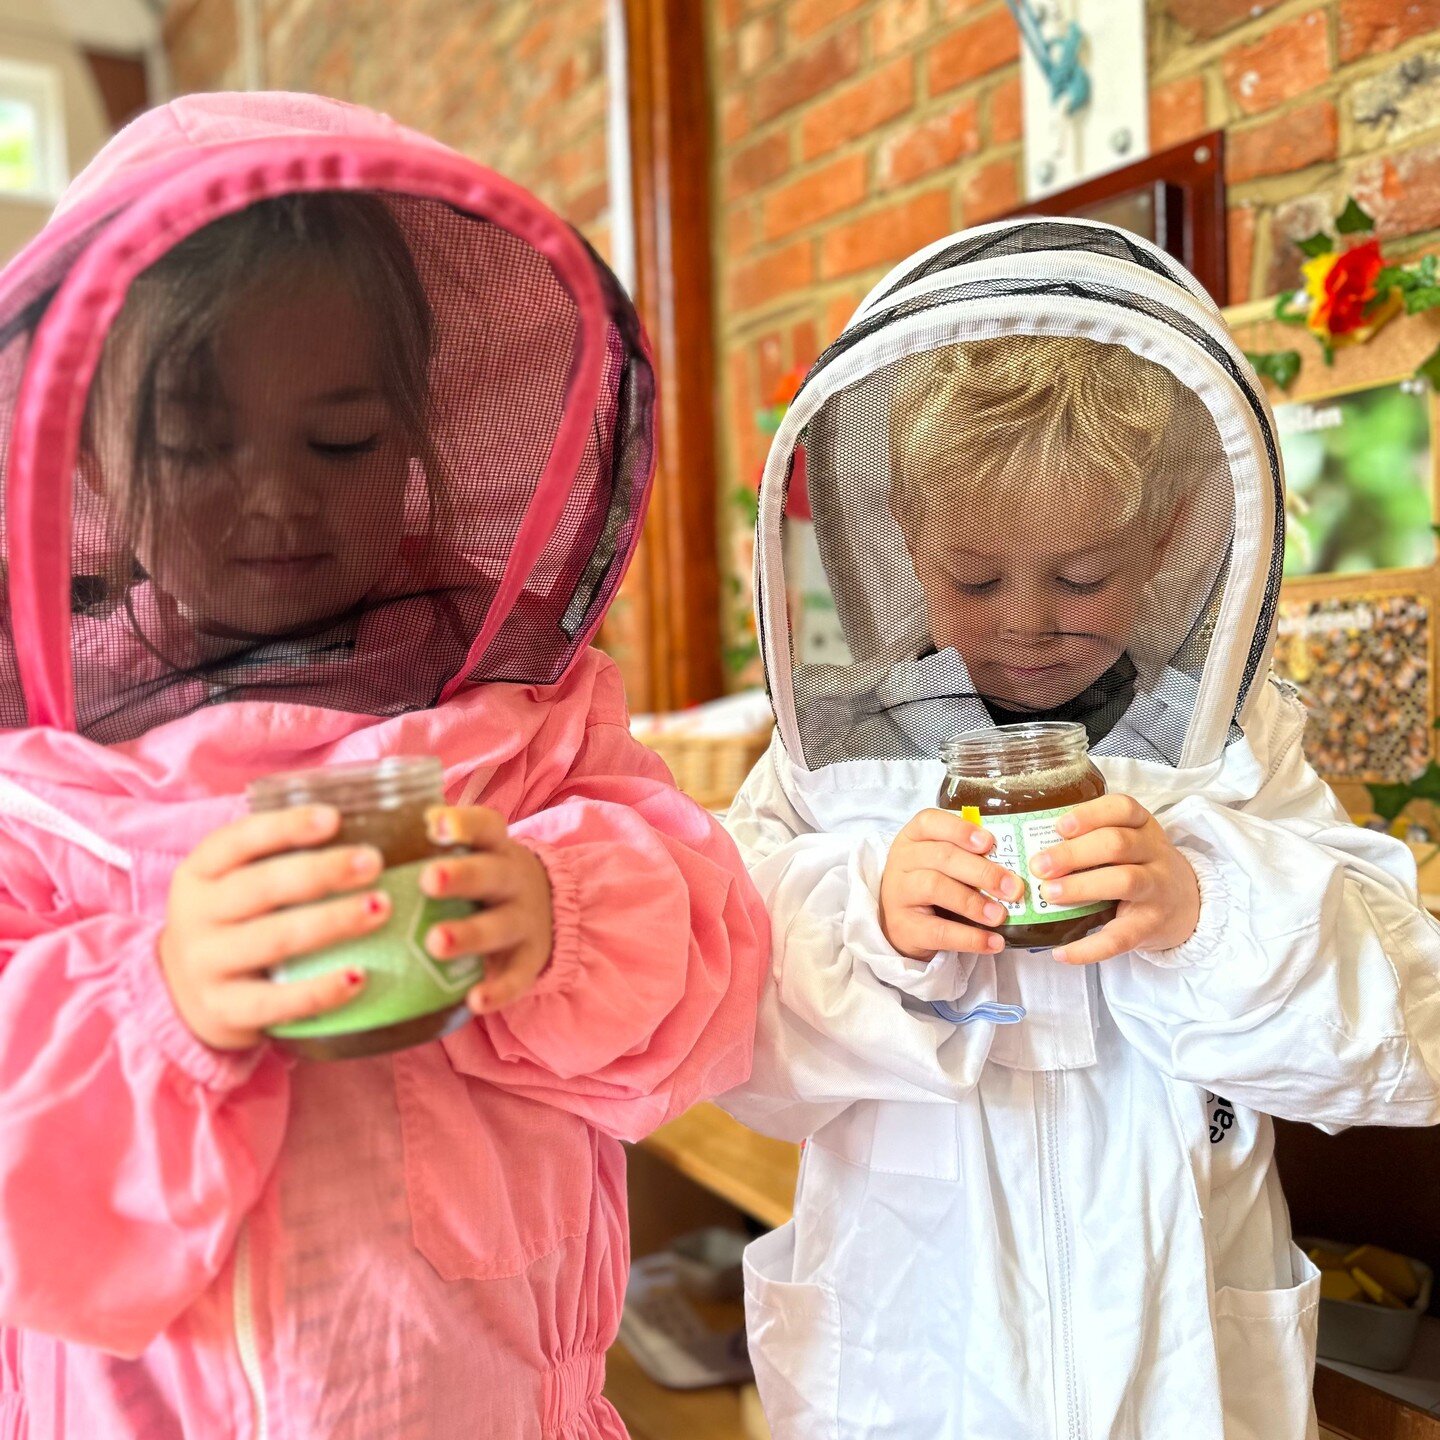 ᦓ᭙ꫀꫀꪻ ꪖᦓ ᥴꪖꪀ ᥇ꫀꫀ 🐝 

One of our lovely parents Mr Lovell was so kind and bought in some real bee keeping suits, some delicious homemade honey and some honeycomb for us to try! It was such a sweet treat and a huge hit with all of the children! 💛

#h